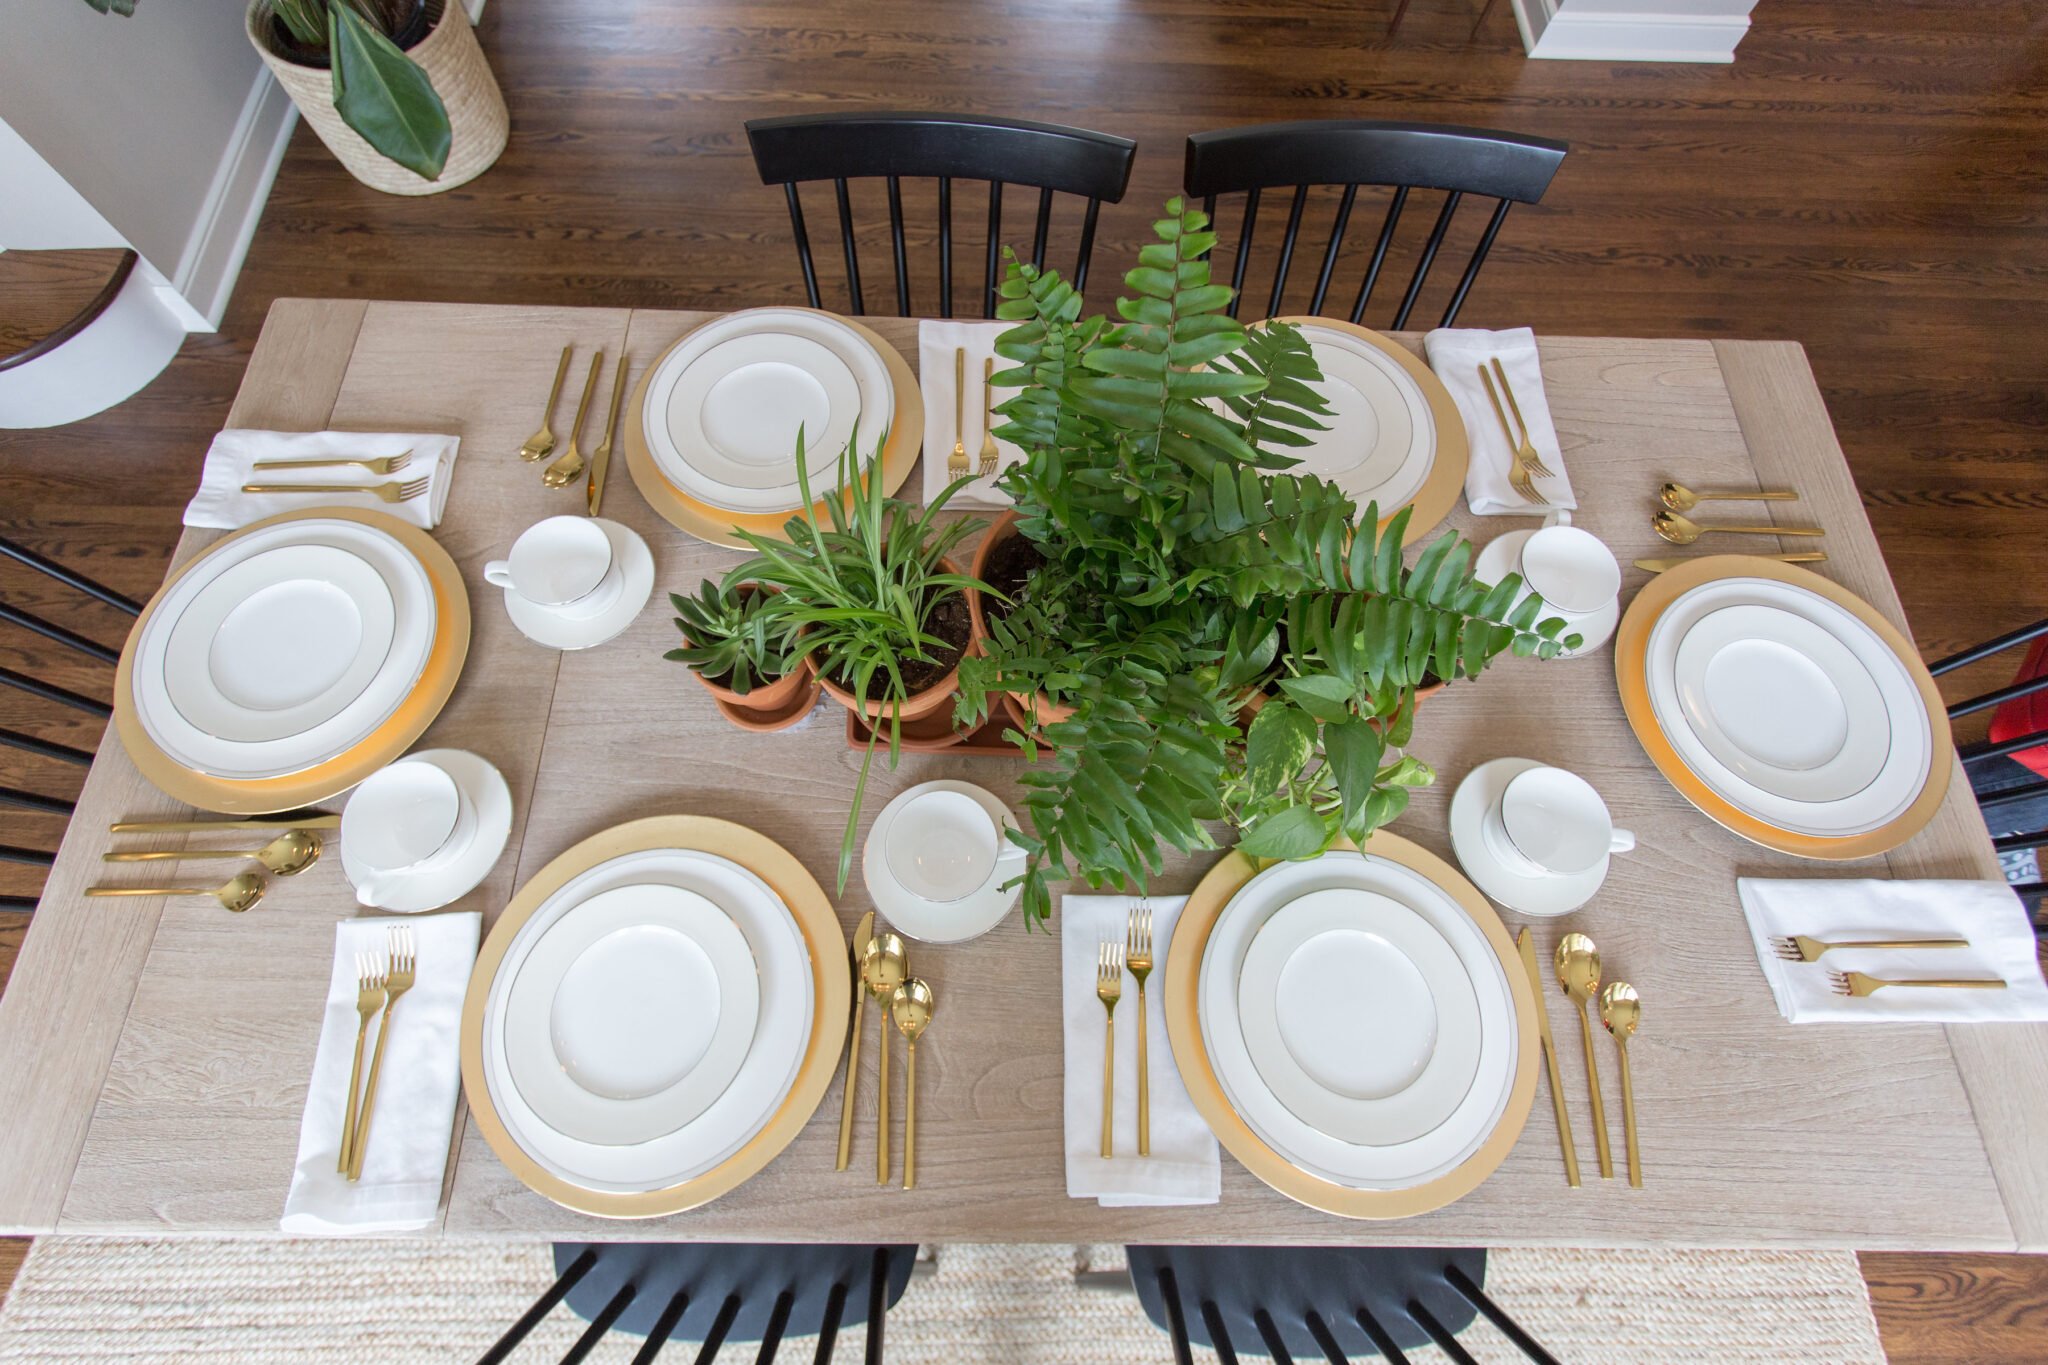 Tablescape with houseplants as centerpiece